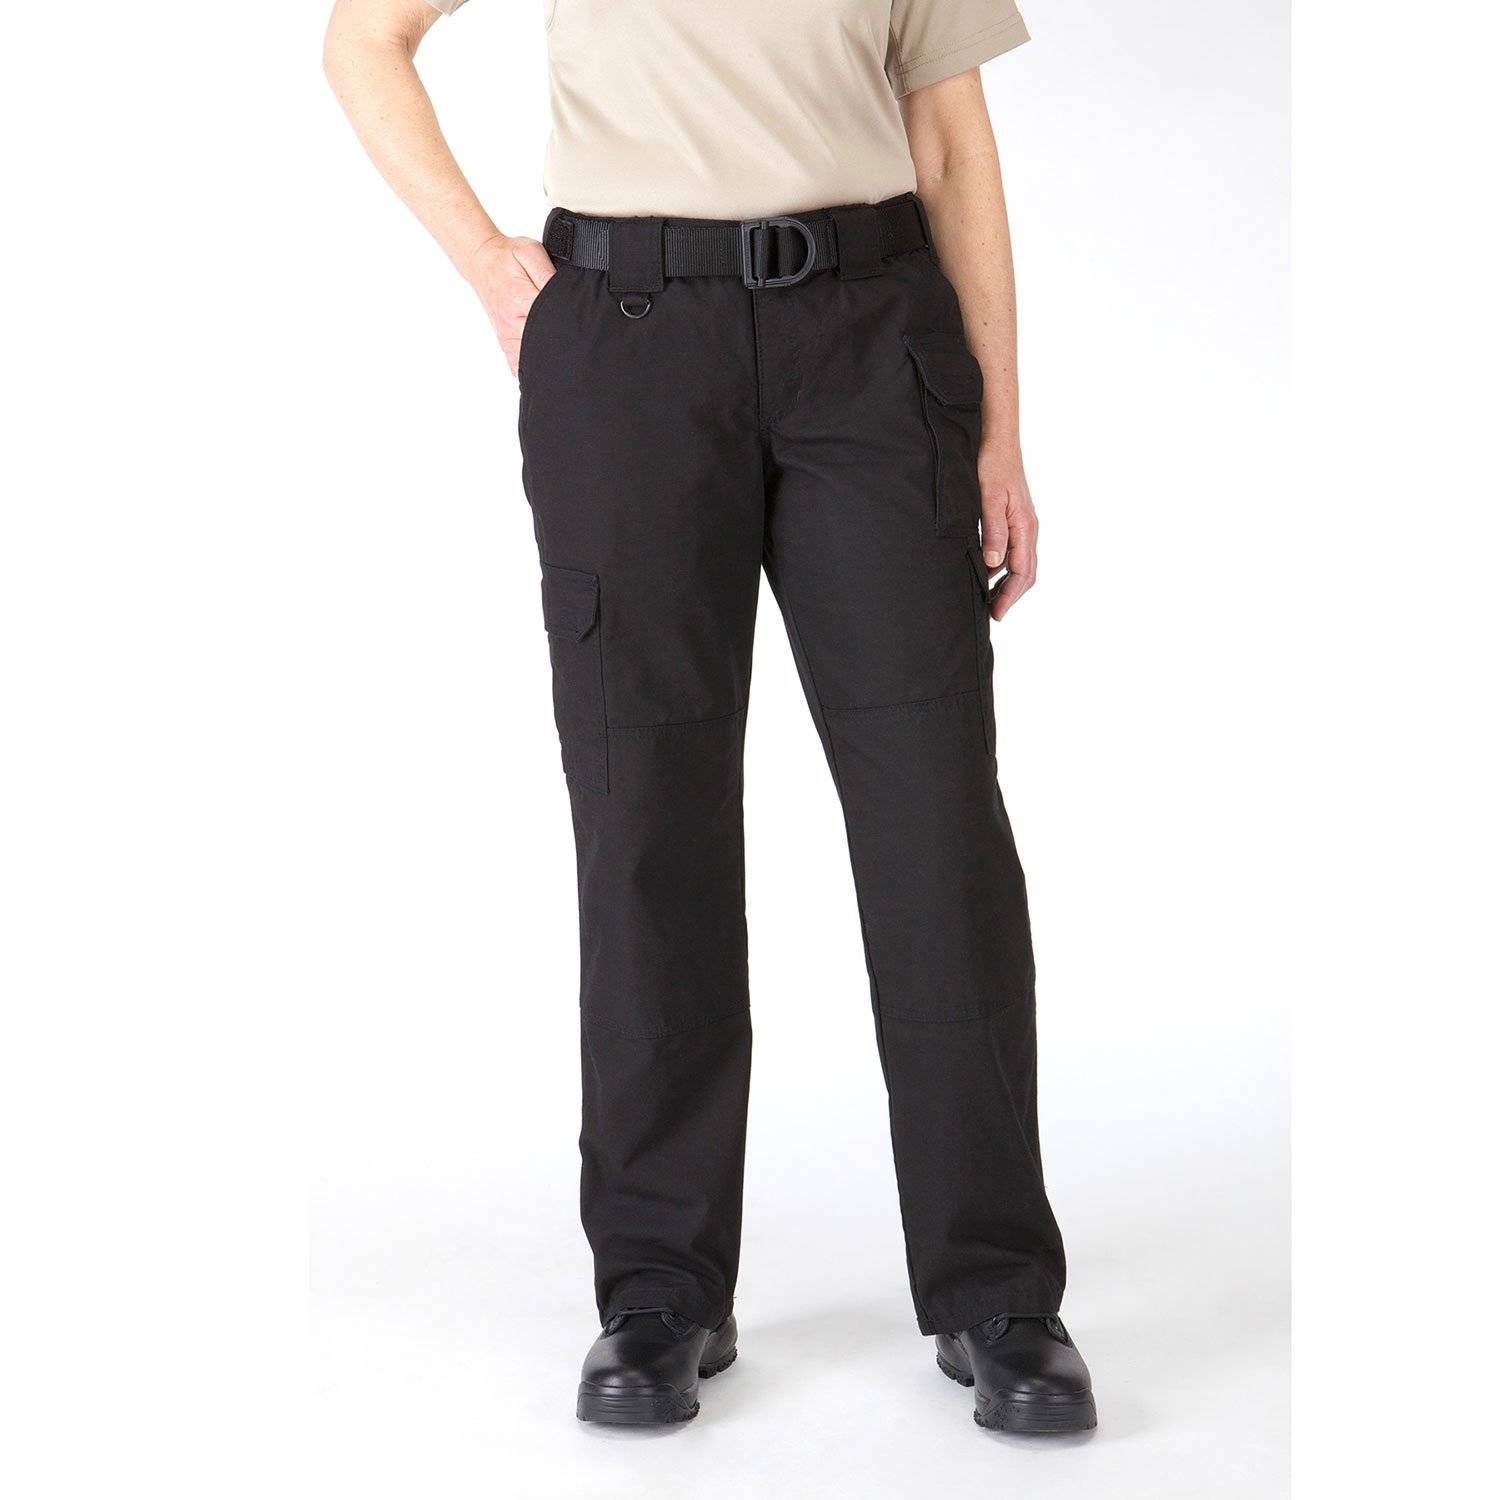 NWT UNDER ARMOUR WOMENS TACTICAL PATROL PANTS